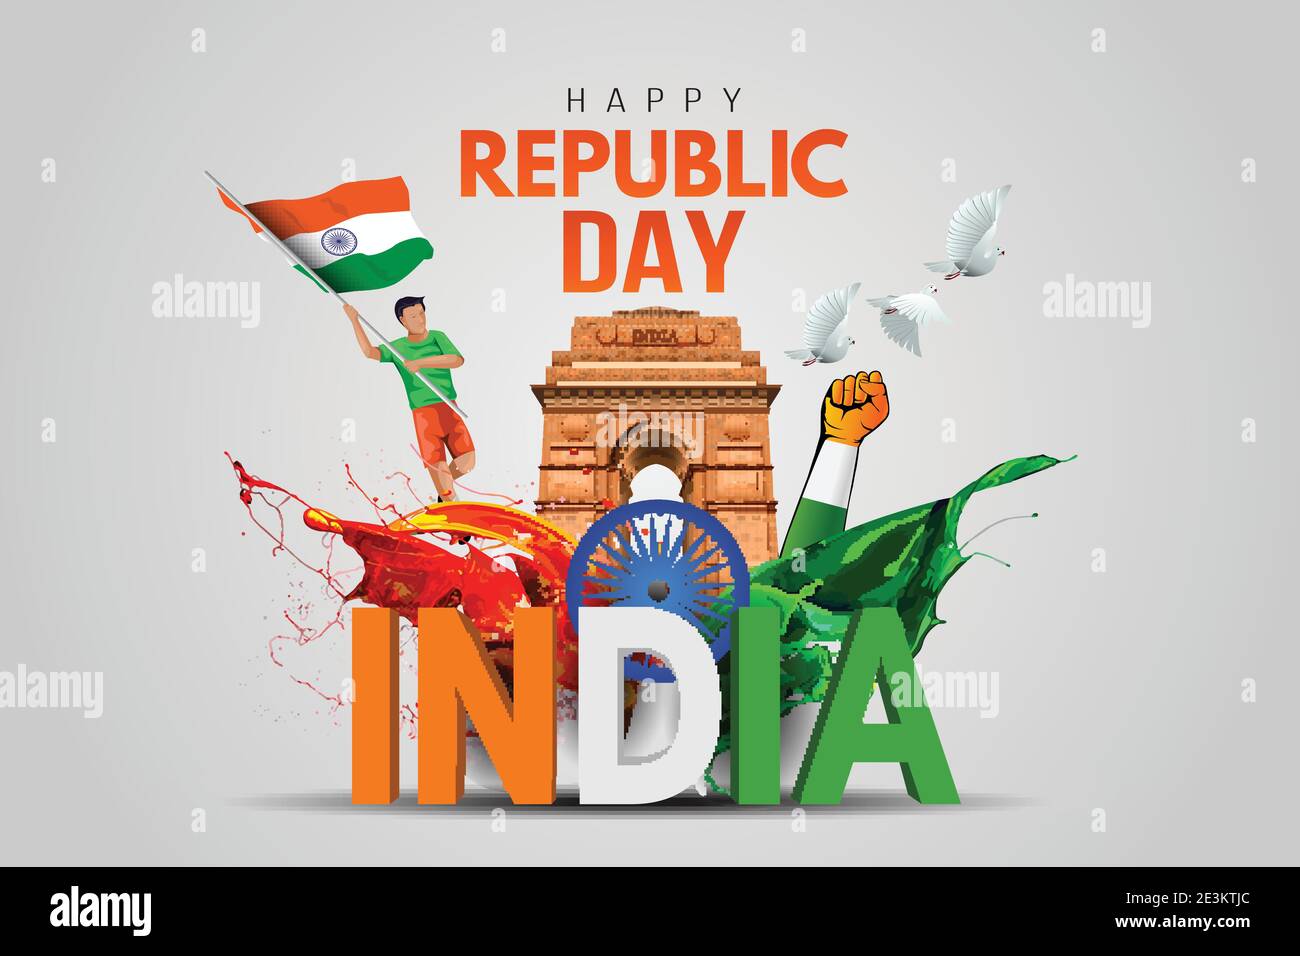 Indian republic Day celebrations with 26th January india 3d text and Ashoka Wheel, try color hand, man running with indian flag, india gate. vector il Stock Vector